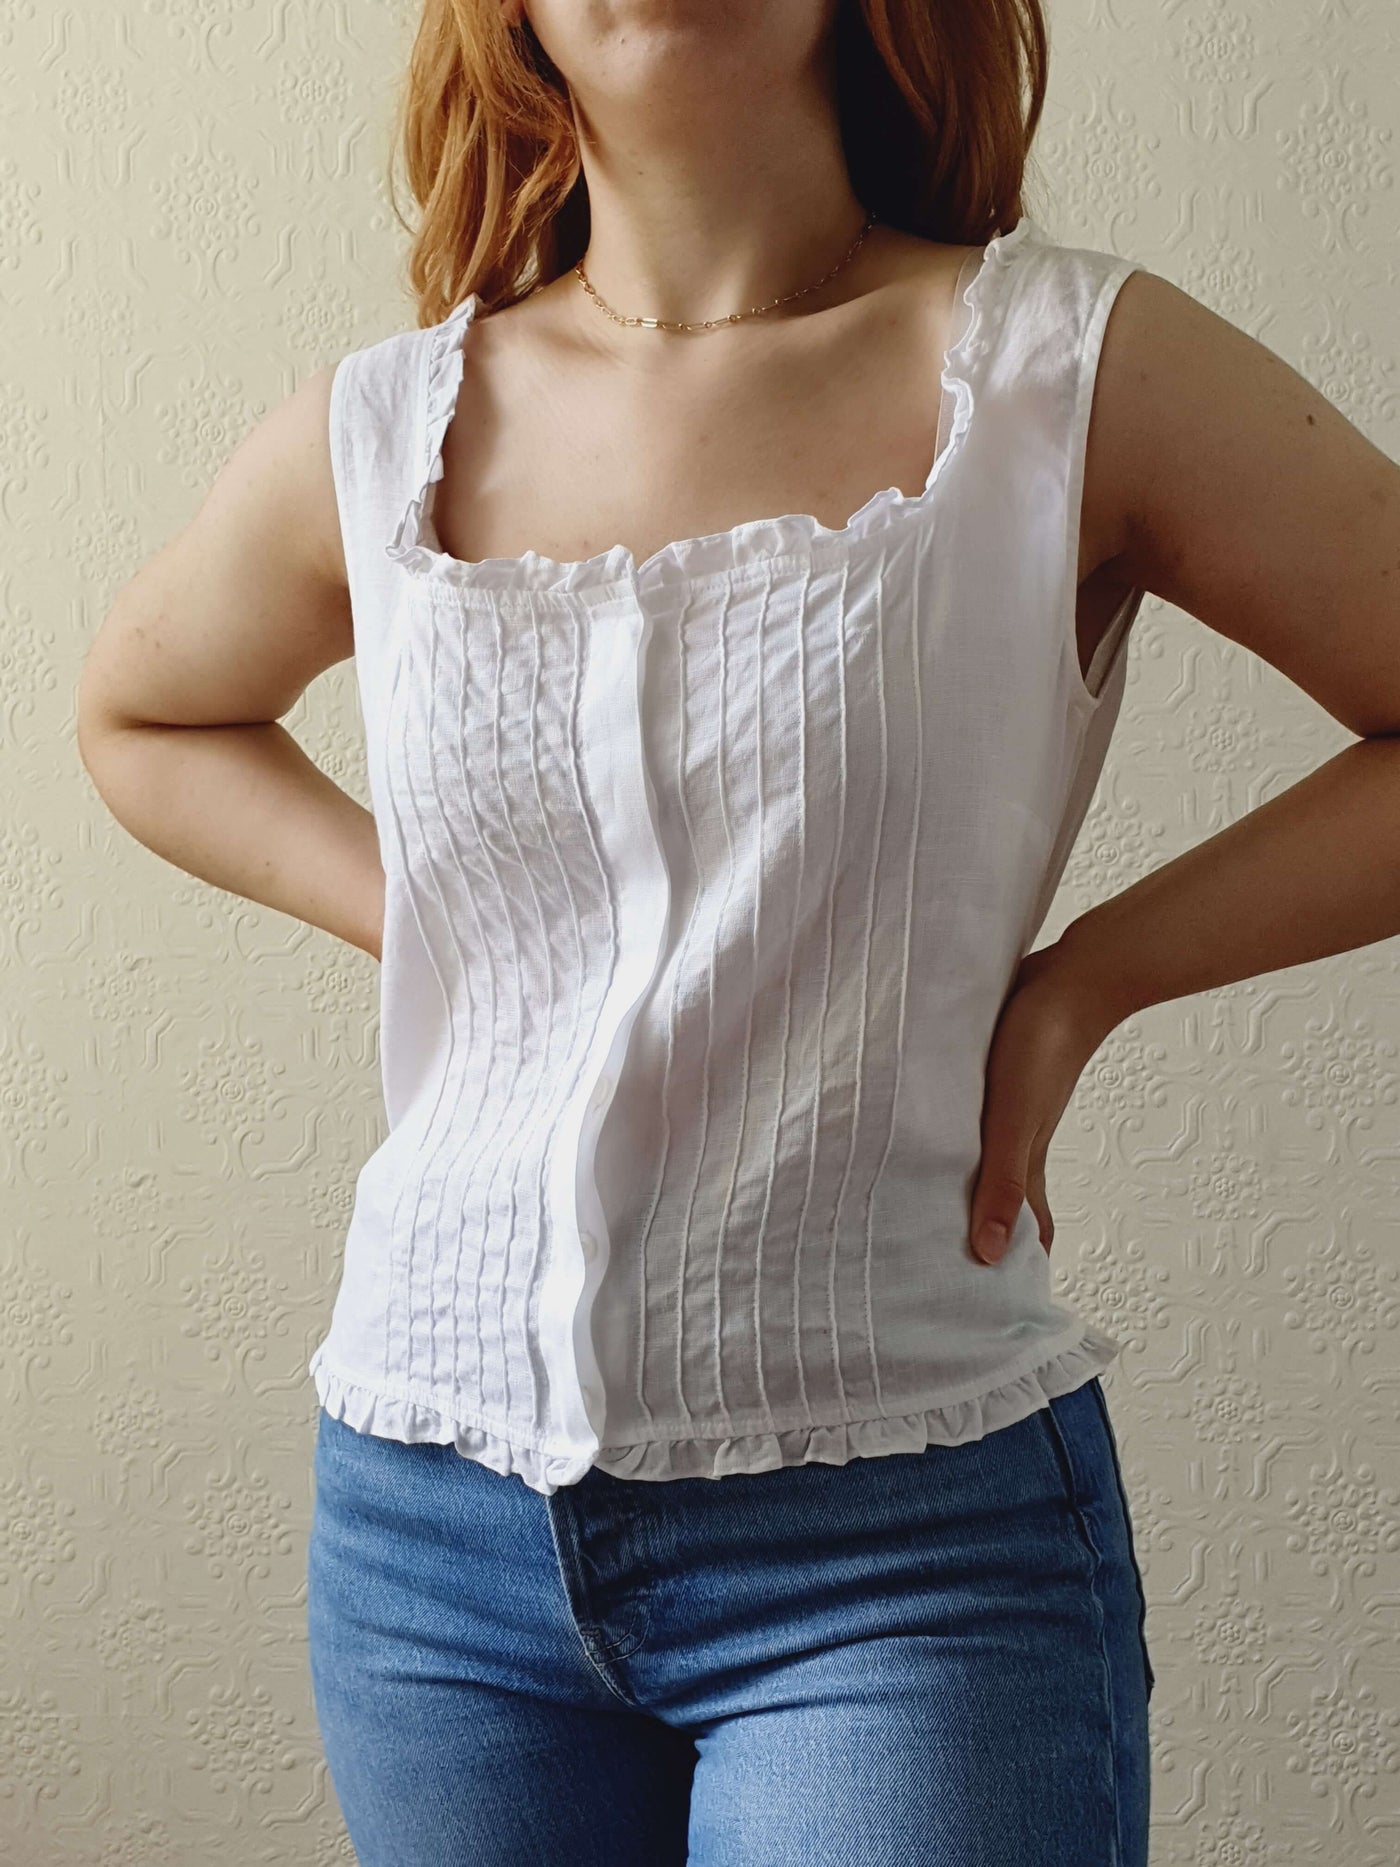 Vintage White Linen Sleeveless Top with Square Neckline - M/L